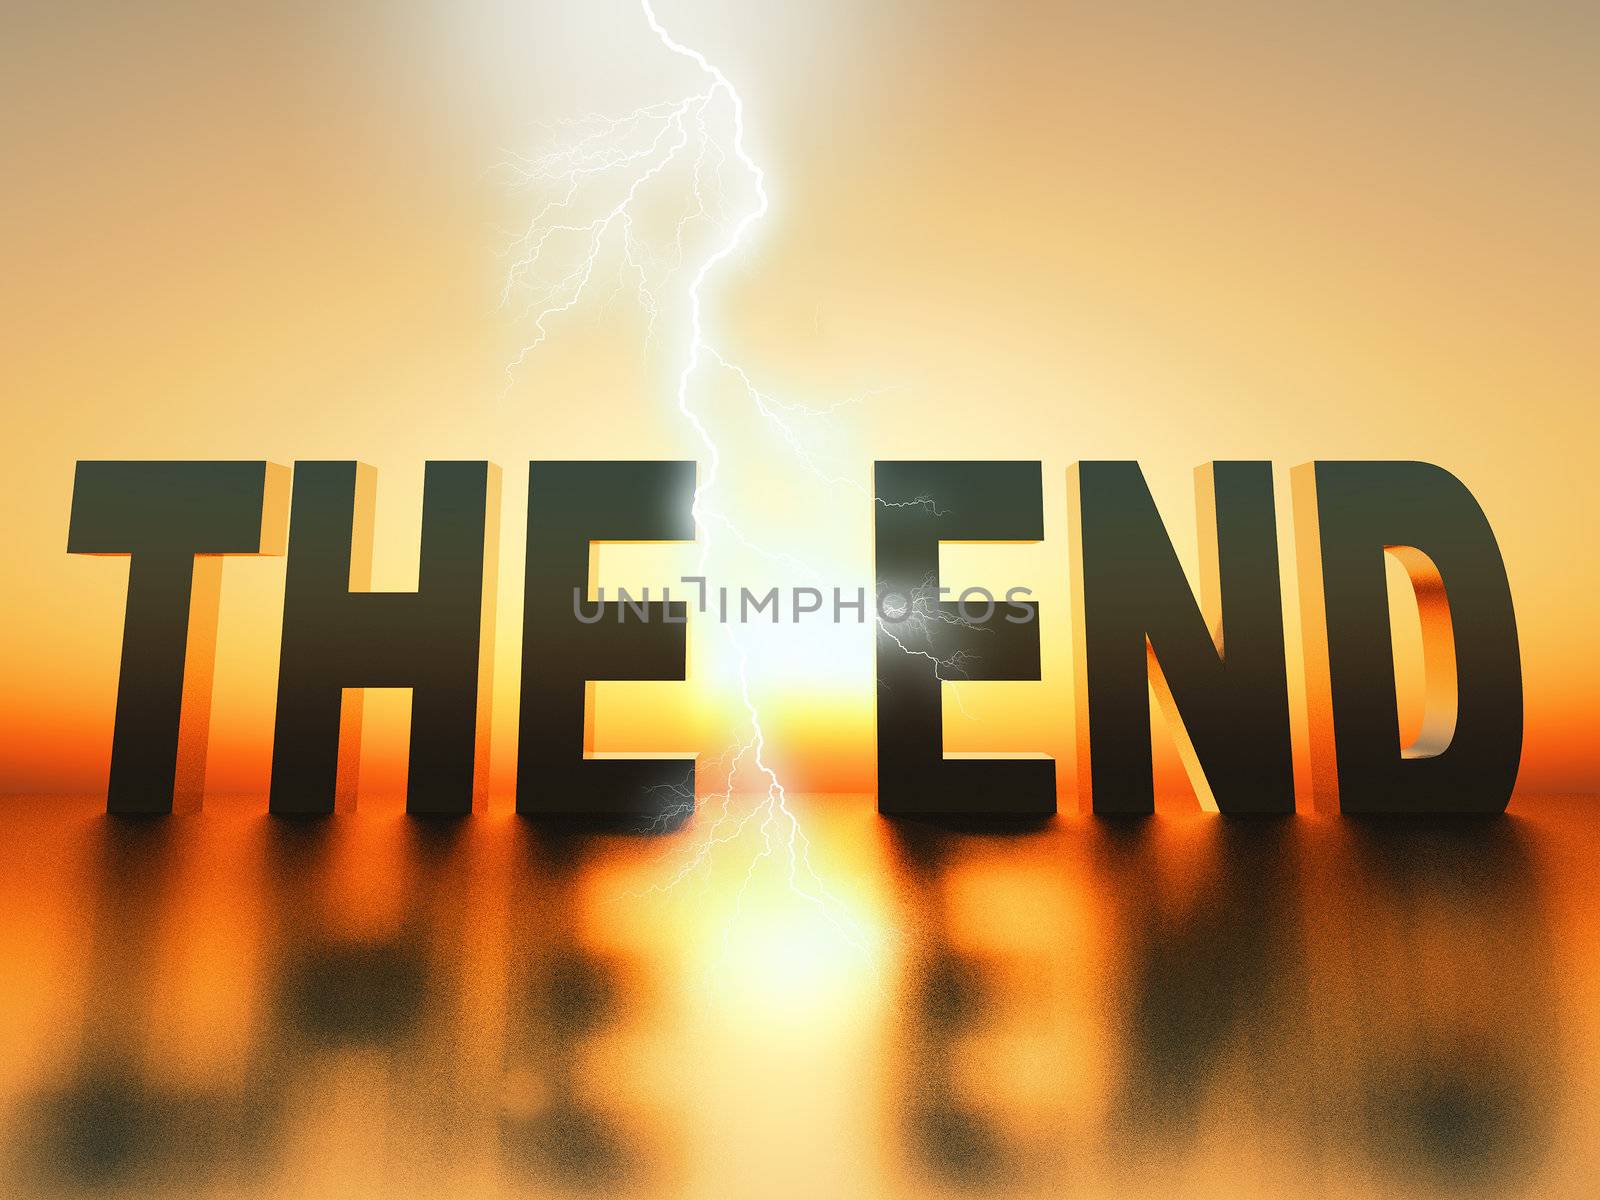 the word "the end" made  in 3 D letters